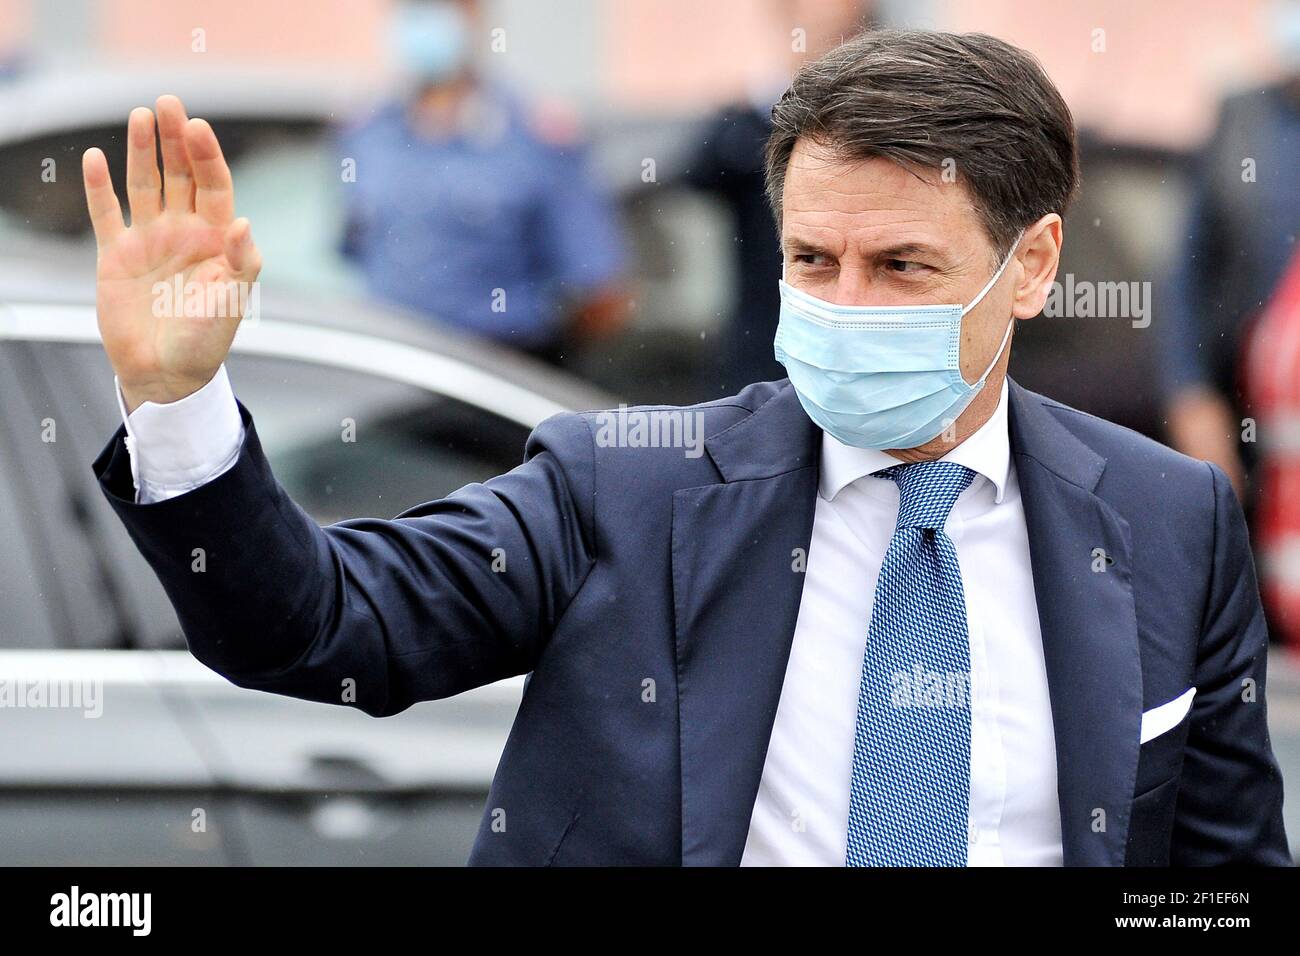 Giuseppe Conte President of the Council of Ministers of the Italian Republic wearing an anti-coronavirus mask, while meeting the citizens of the city Stock Photo